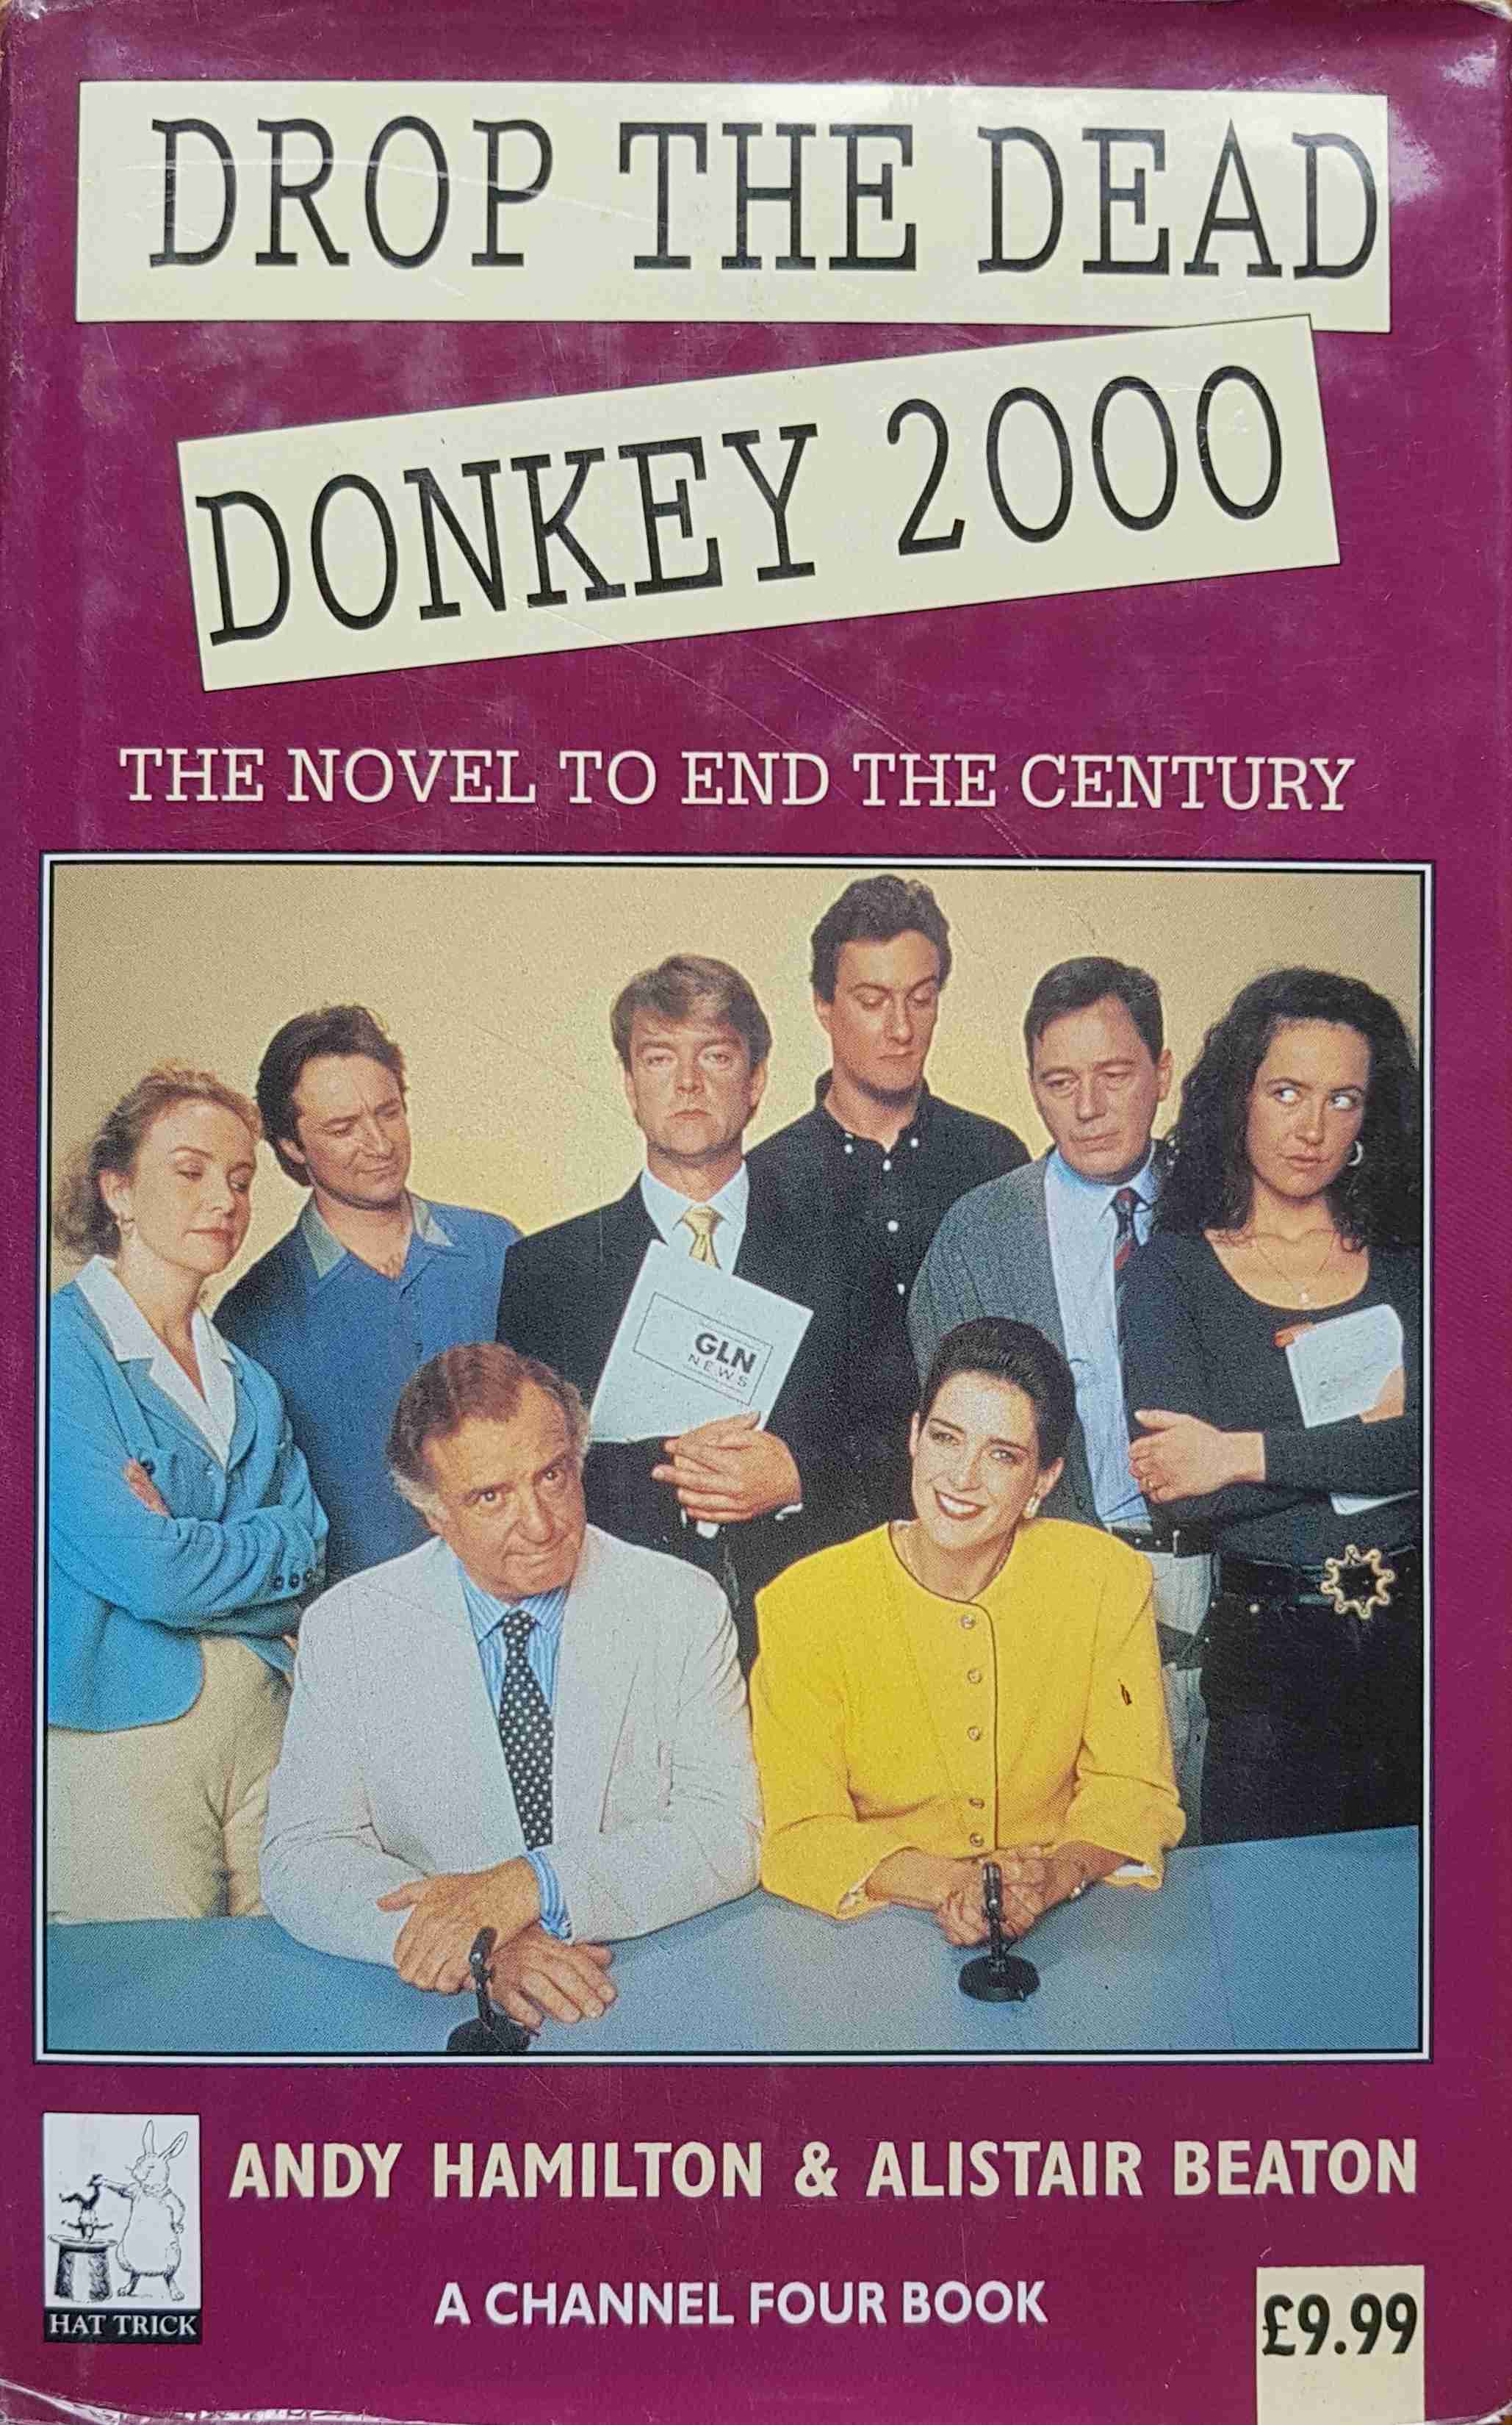 Picture of 0-316-91236-0 Drop the dead donkey by artist Andy Hamilton / Alistair Beaton from ITV, Channel 4 and Channel 5 books library